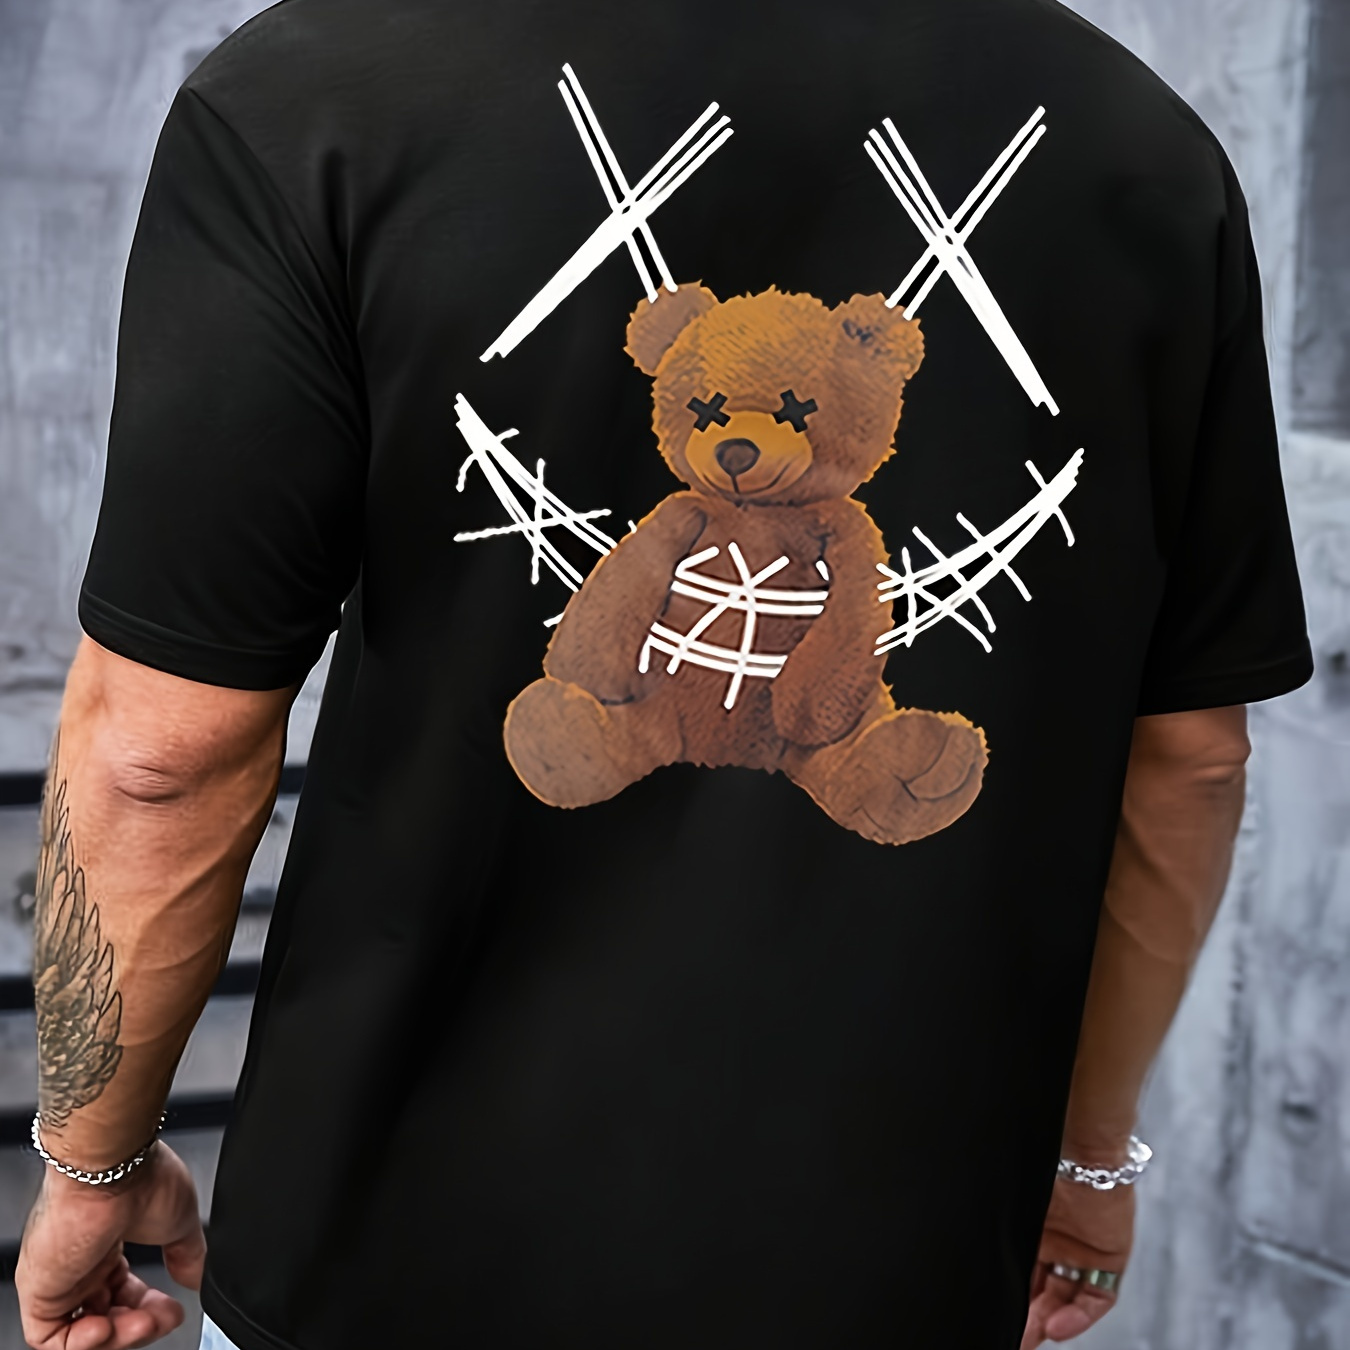 Men's Teddy Bear And Evil Smiling Face Pattern Crew Neck And Short Sleeve T-shirt, Novel And Cool Tops For Summer Street Wear